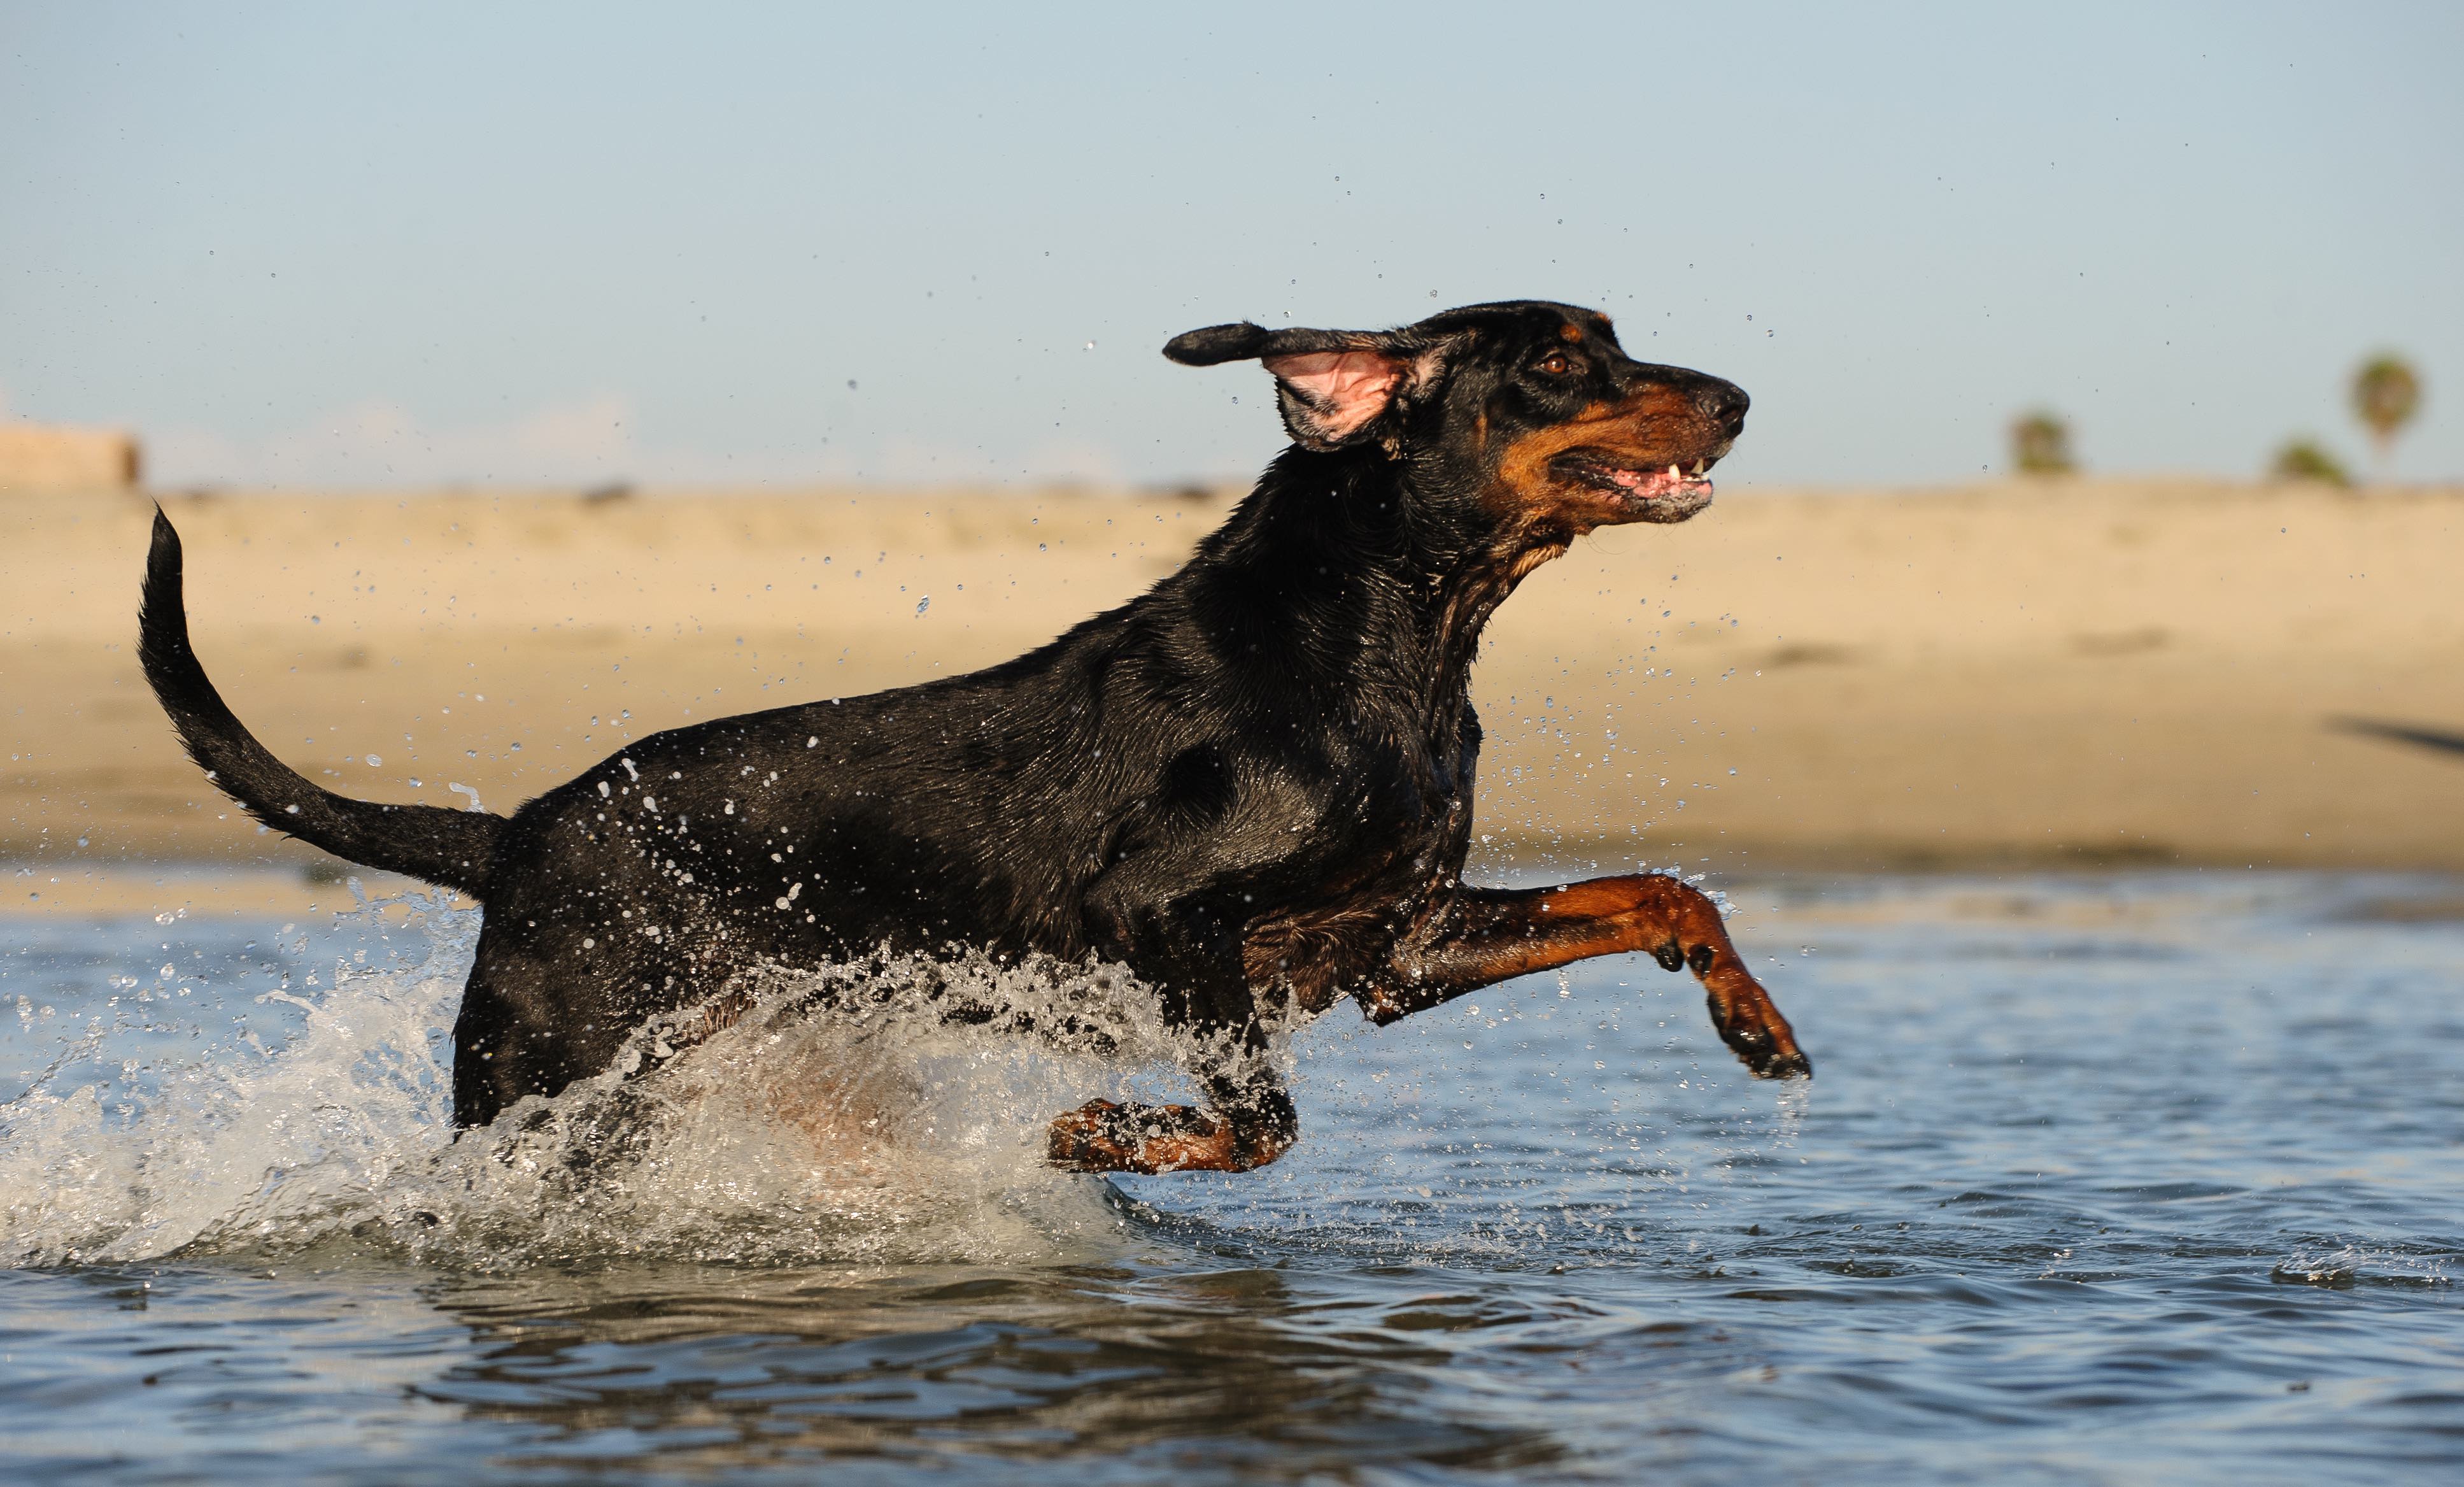 black and tan coonhound running through waves on a beach